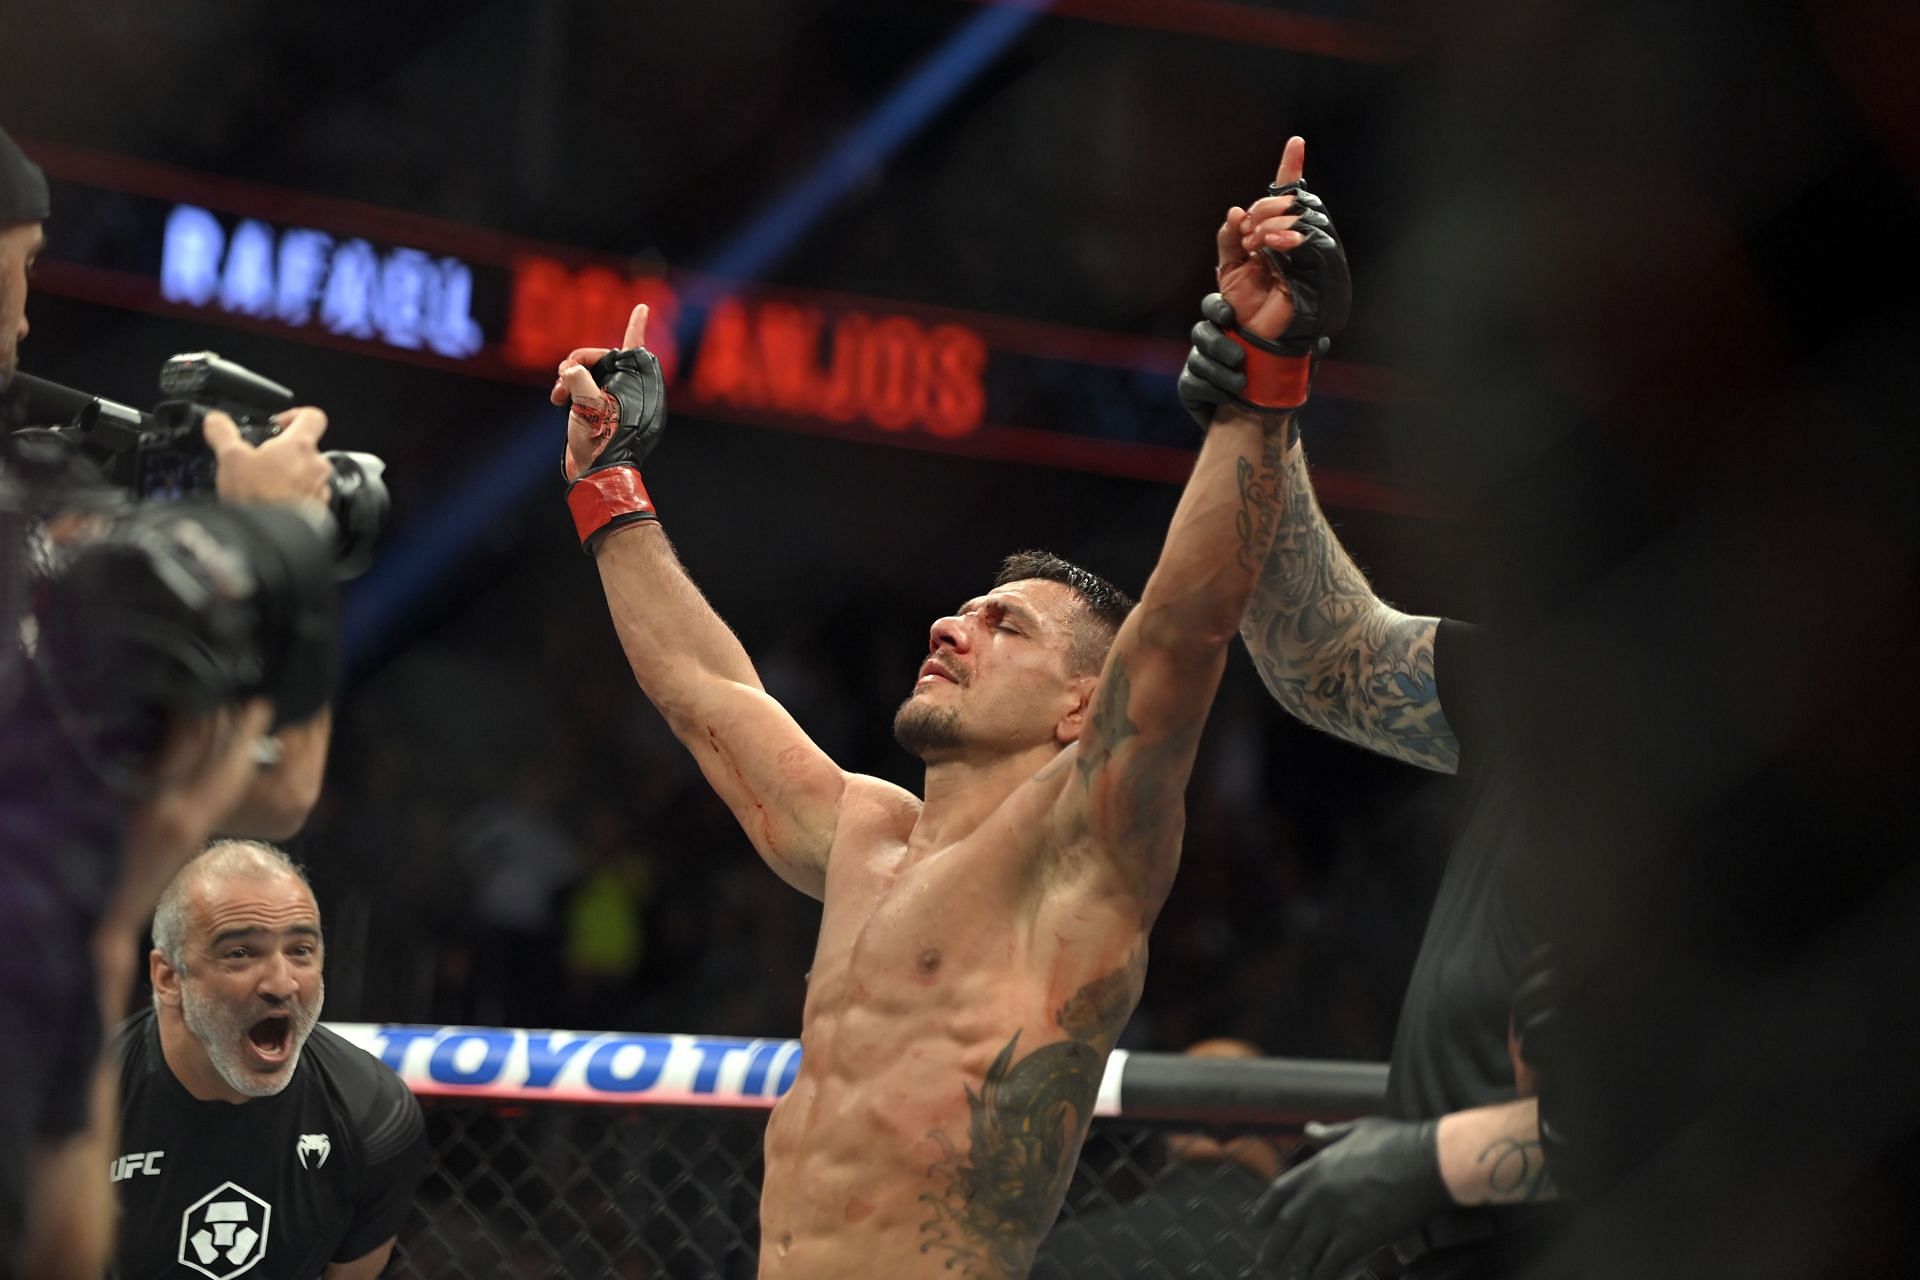 Rafael Dos Anjos prolonged his UFC career by moving to 170lbs